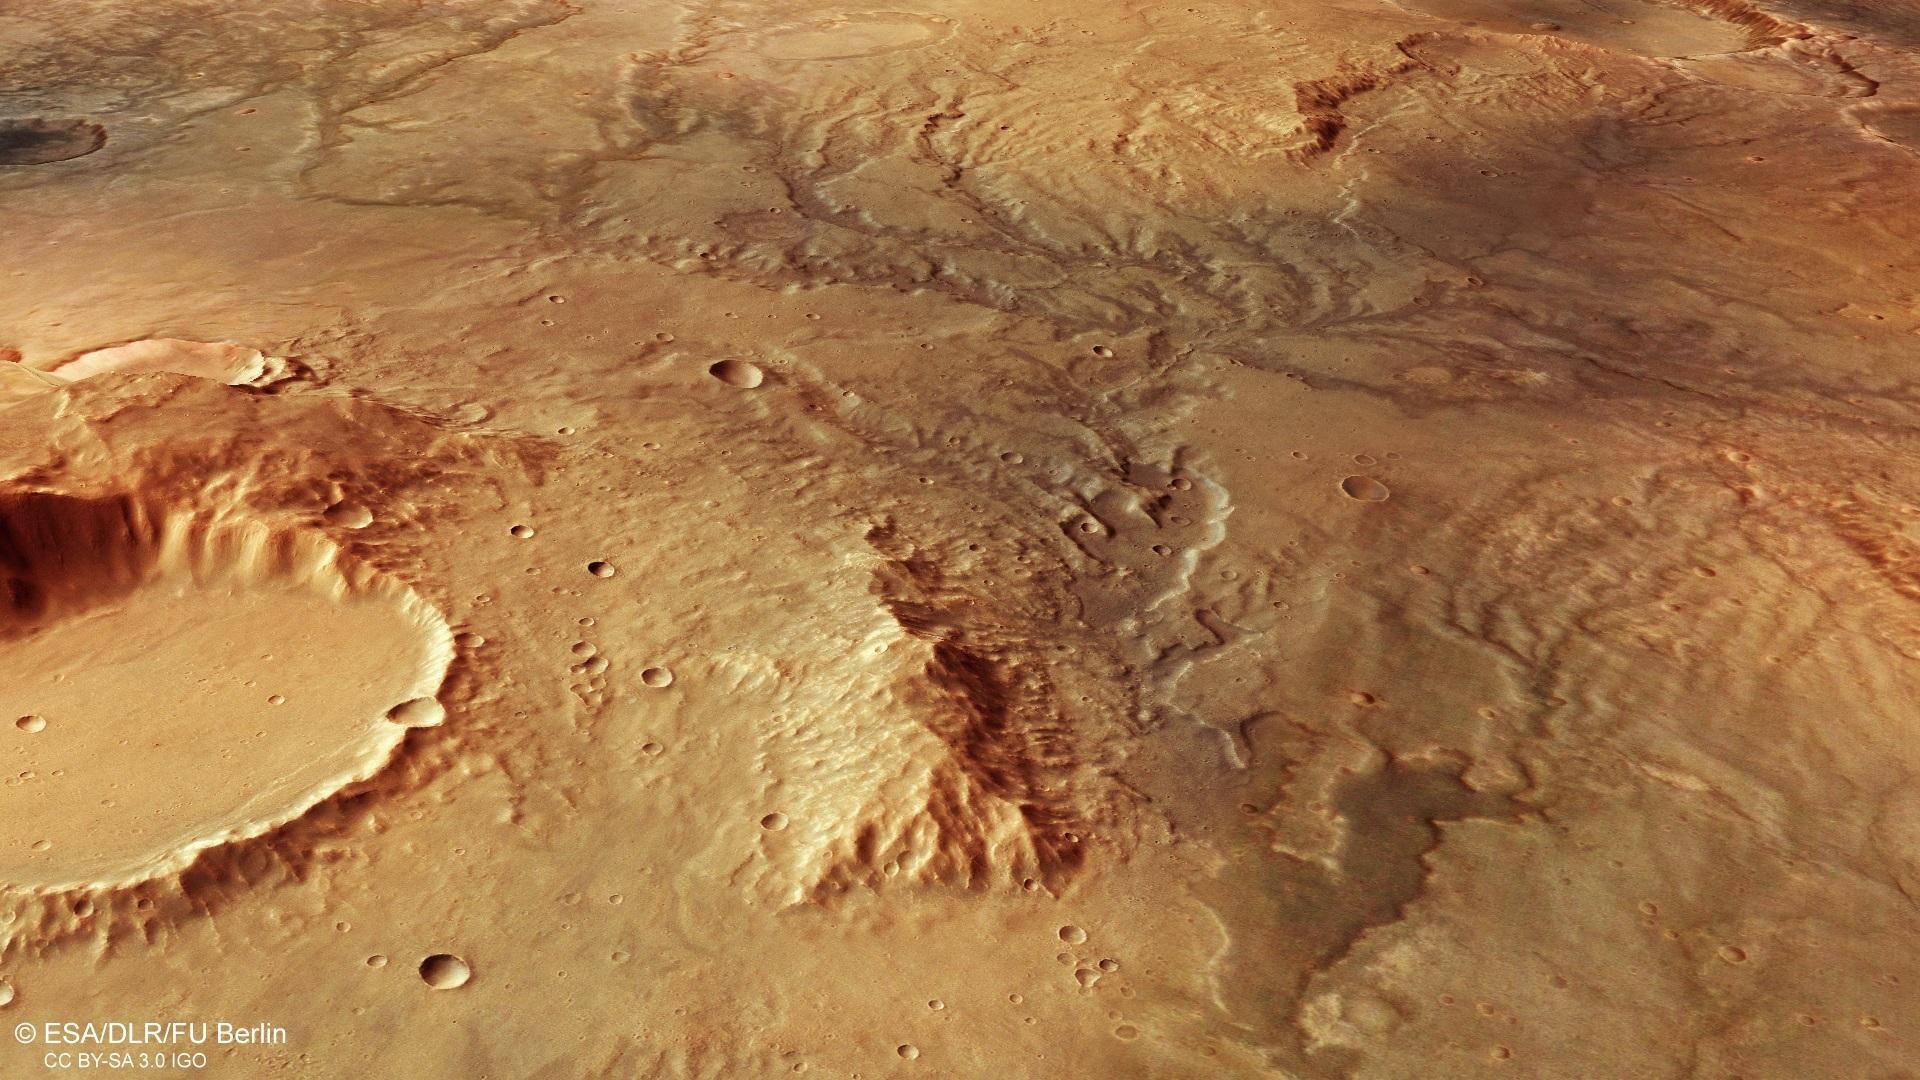 Oblique perspective view of the valley network east of Huygens Crater